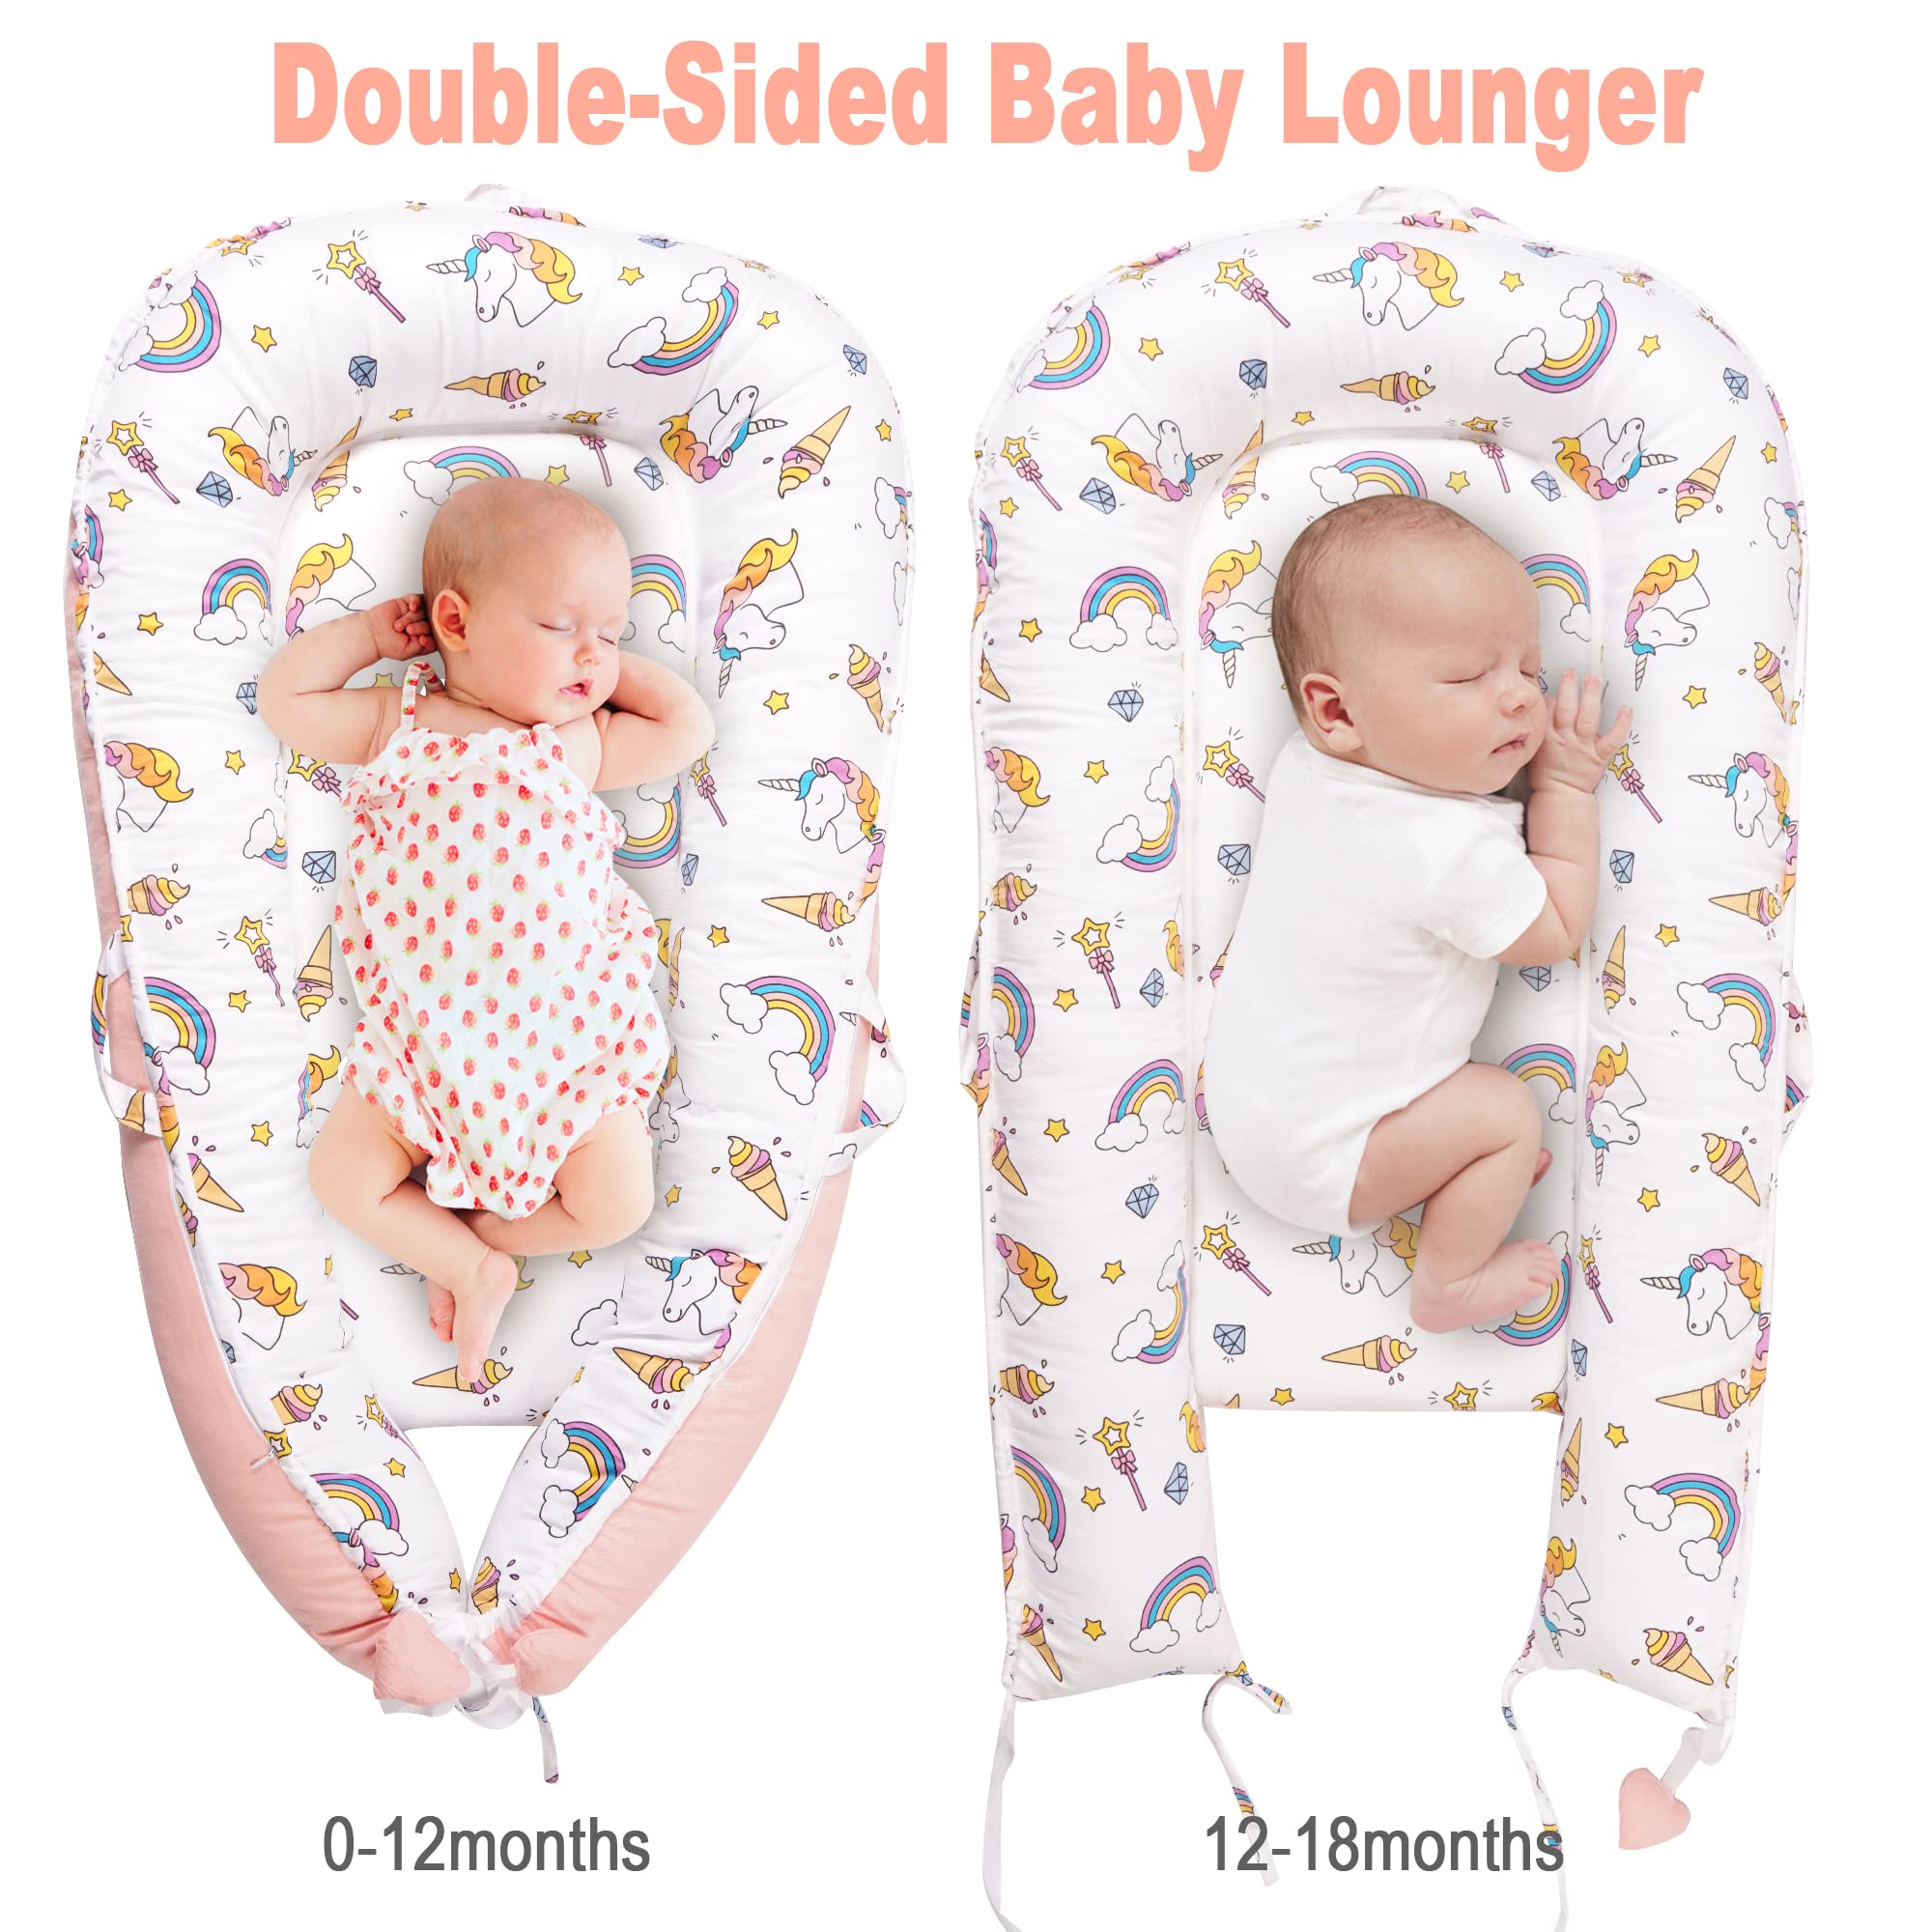 Baby Lounger for Baby Girls Boys Soft Breathable Lounger Cover Fits 0-24 Months Newborn Infant Babies